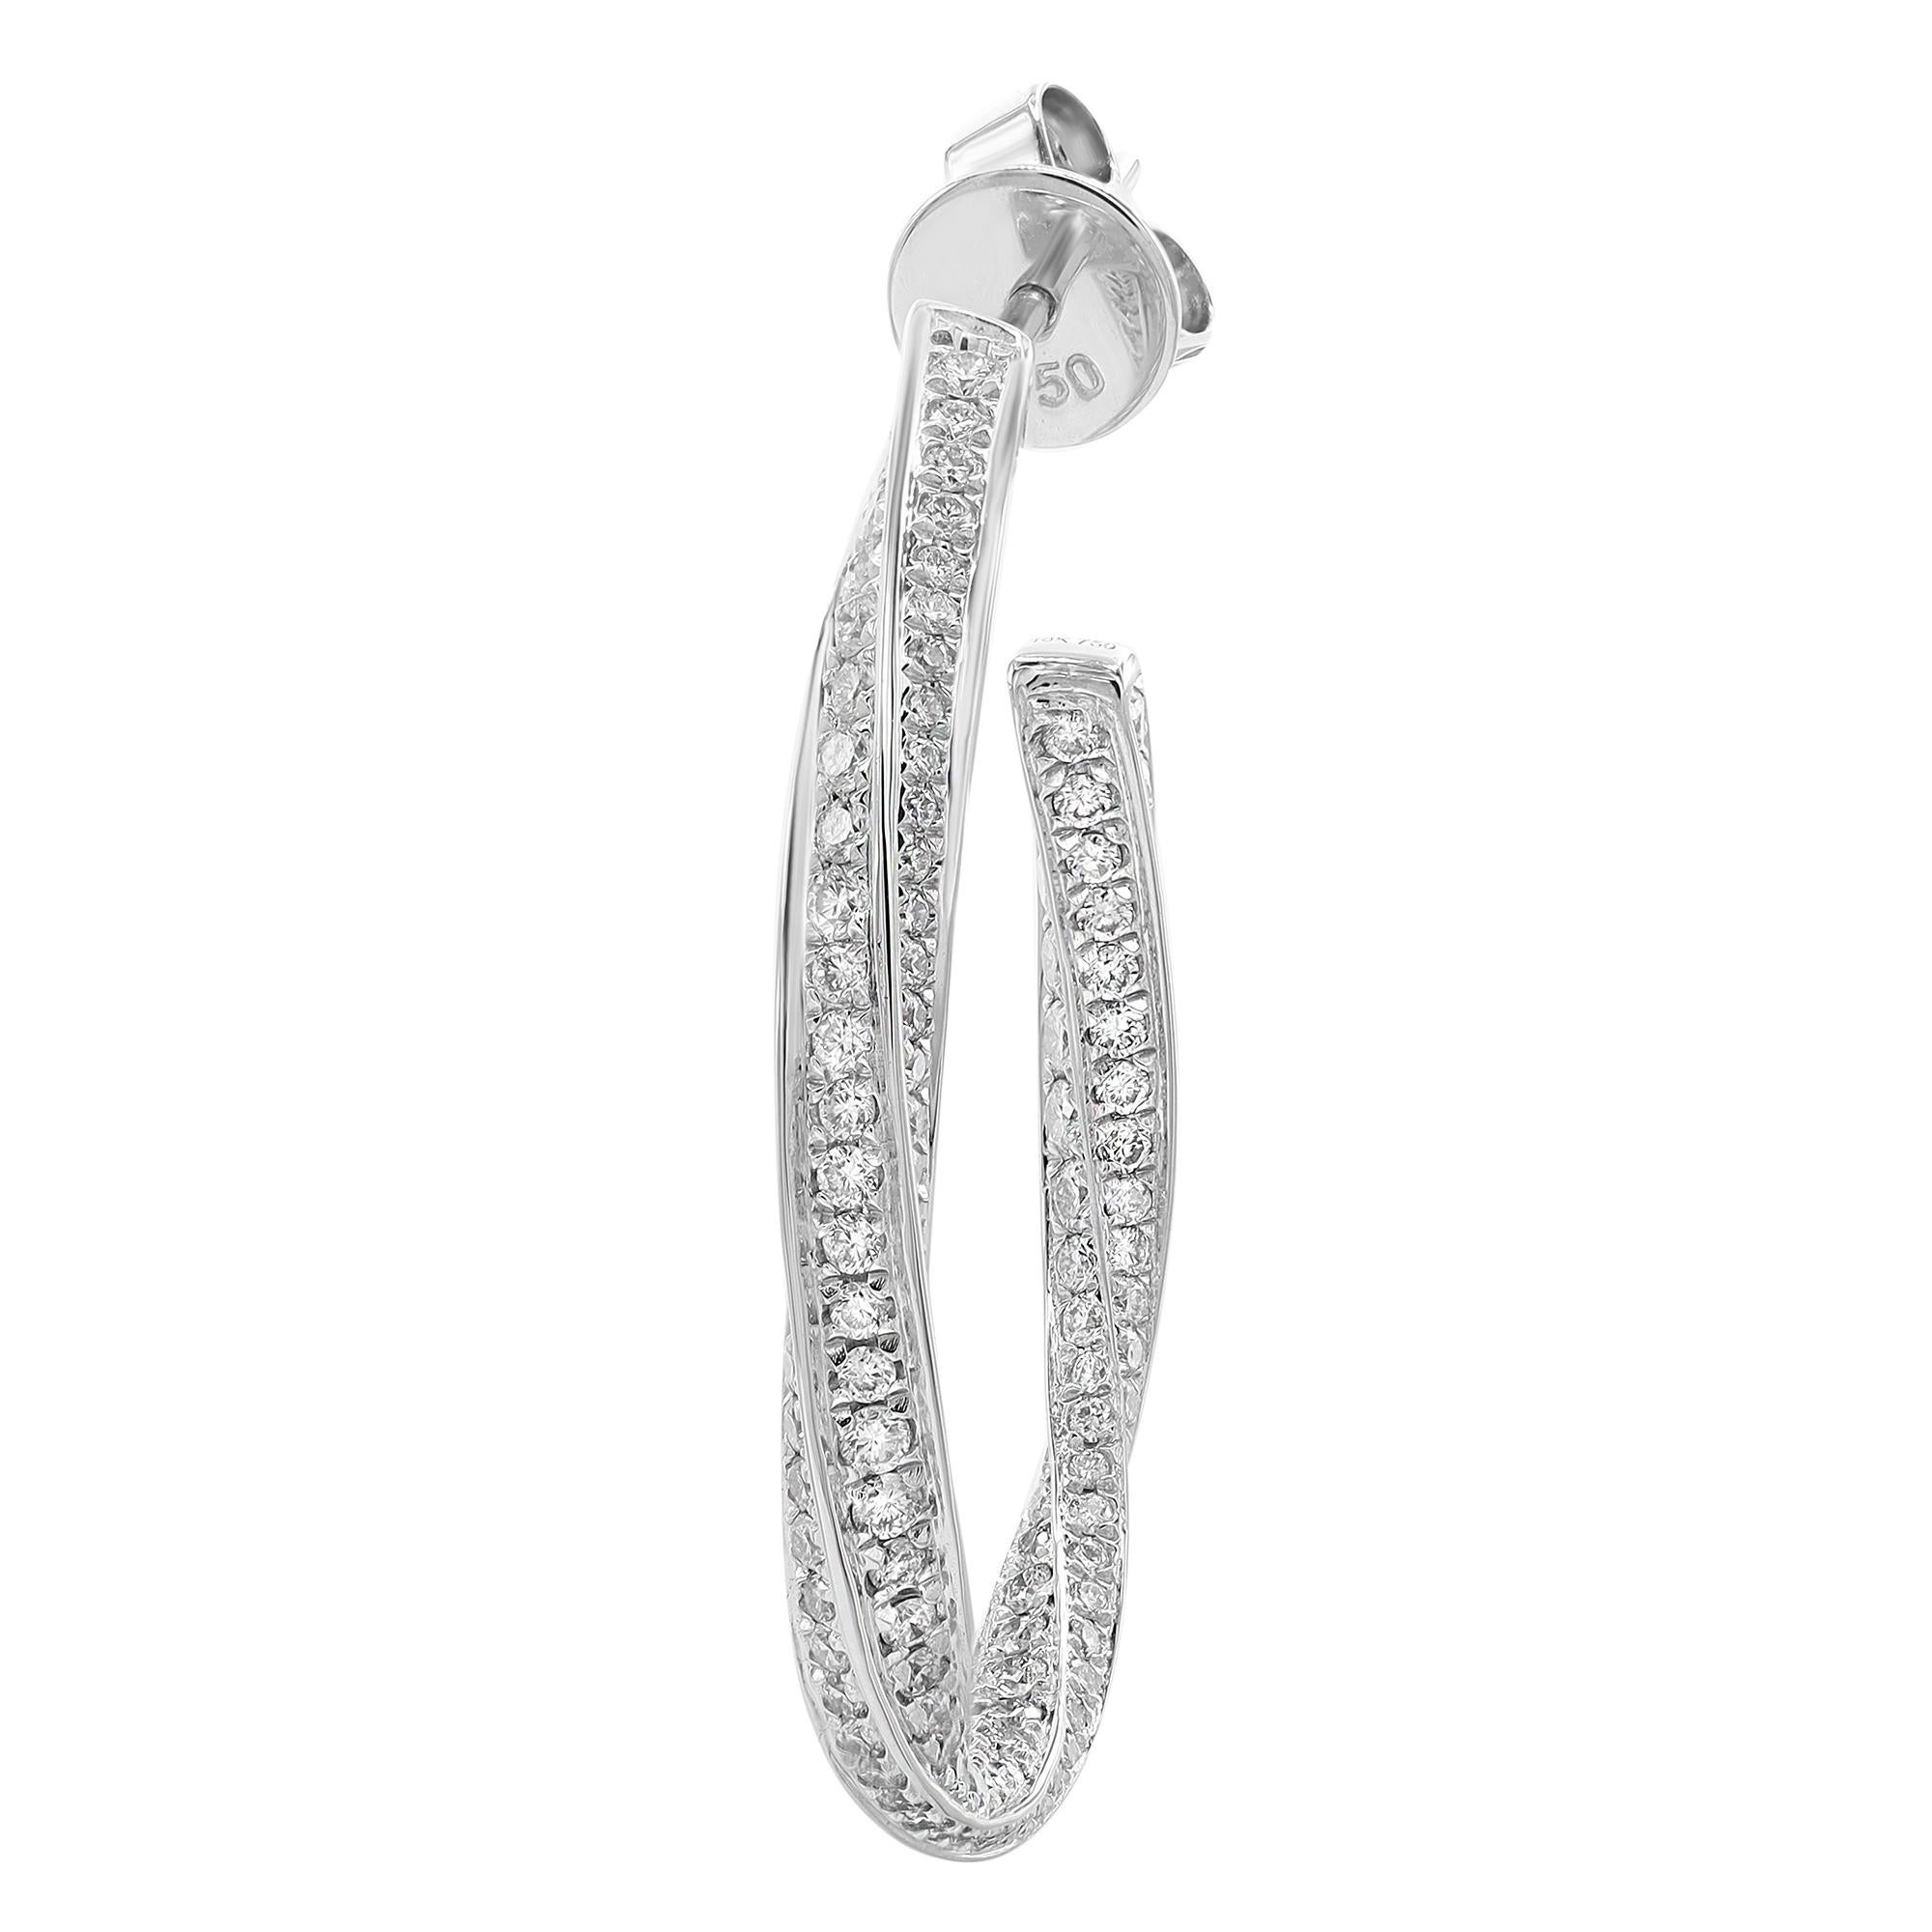 Dainty and dazzling diamond hoop earrings, perfect for a standout look. These earrings are crafted in fine high polished 18K white gold and pave set with bright white round cut diamonds weighing 2.02 carats. Diamond quality: color G-H and clarity